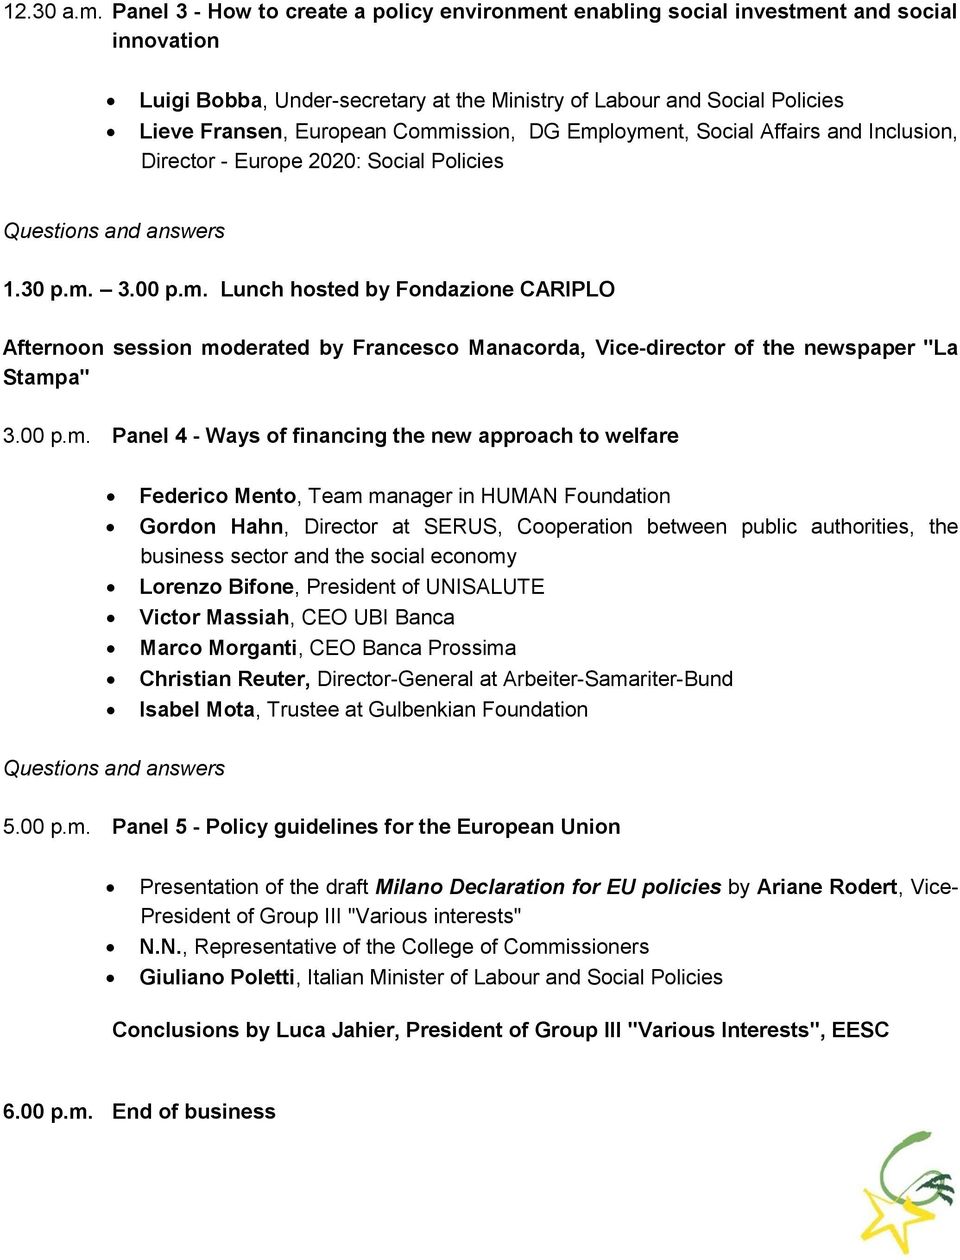 Commission, DG Employment, Social Affairs and Inclusion, Director - Europe 2020: Social Policies 1.30 p.m. 3.00 p.m. Lunch hosted by Fondazione CARIPLO Afternoon session moderated by Francesco Manacorda, Vice-director of the newspaper "La Stampa" 3.